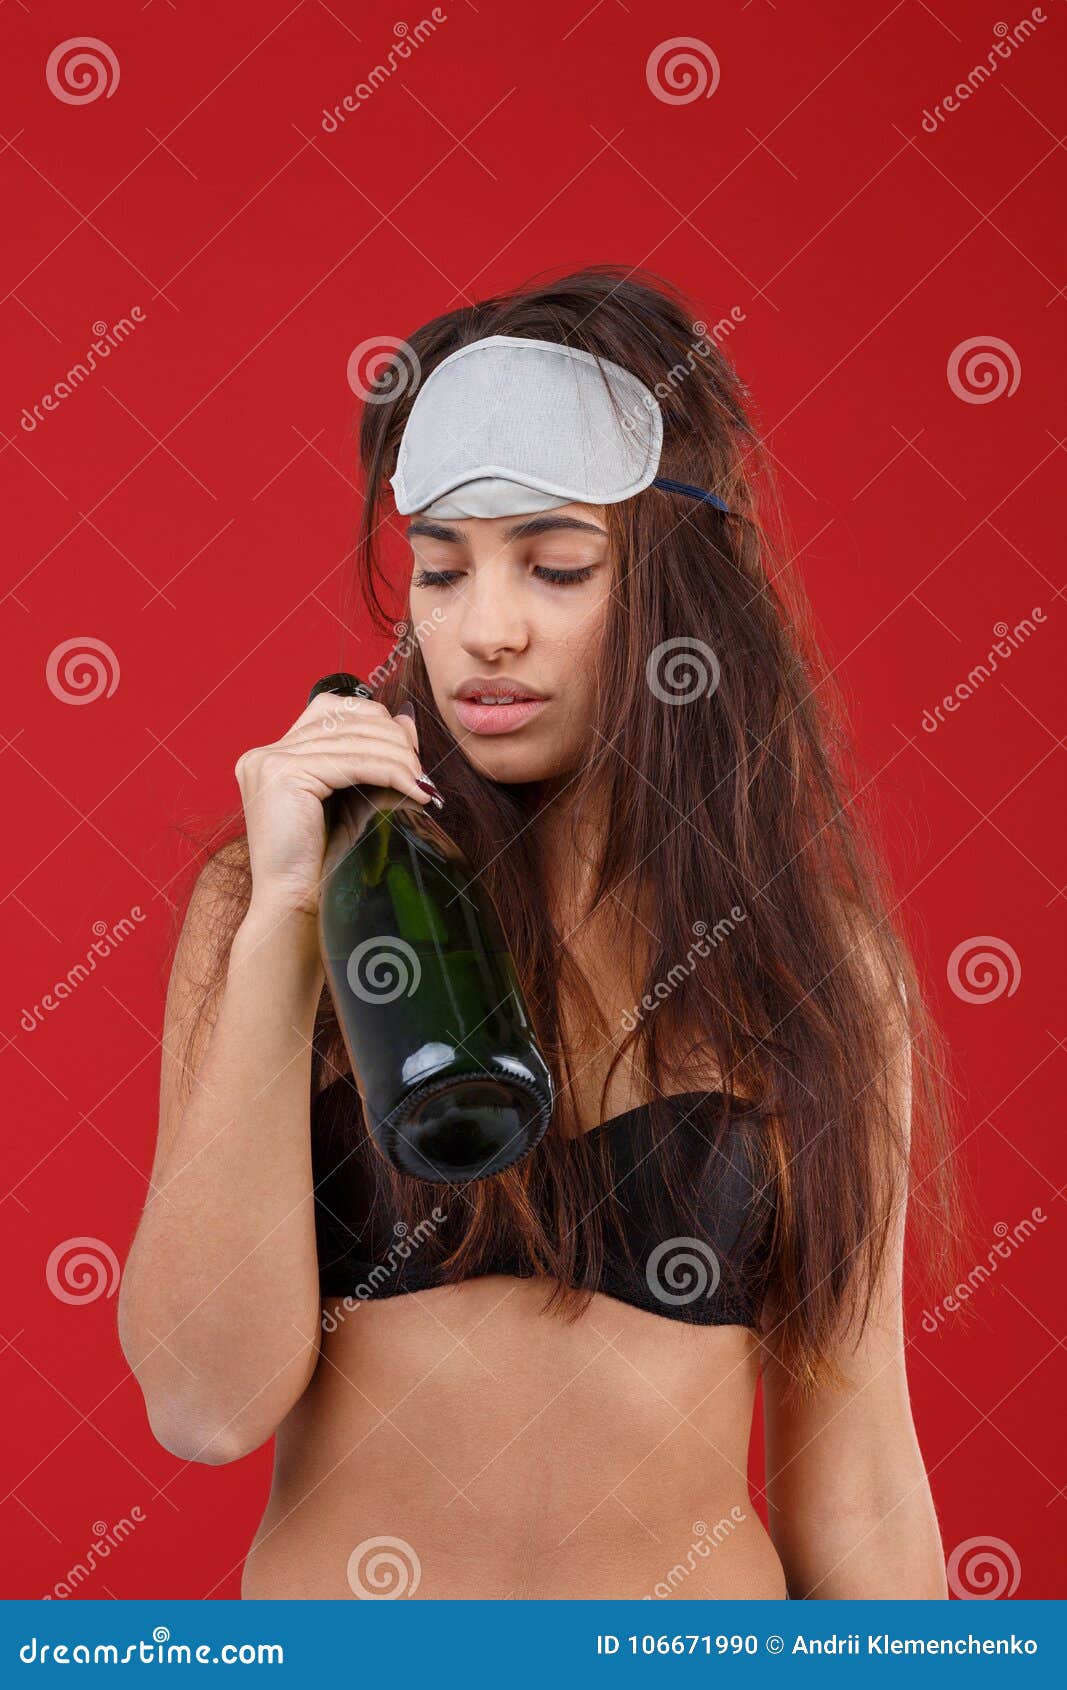 Free Shipping on All Orders A Young Girl, in a Bra and a Sleeping Mask,  Holds a Bottle of Alcohol and Looks at it. on a Red Background. Stock Photo  - Image